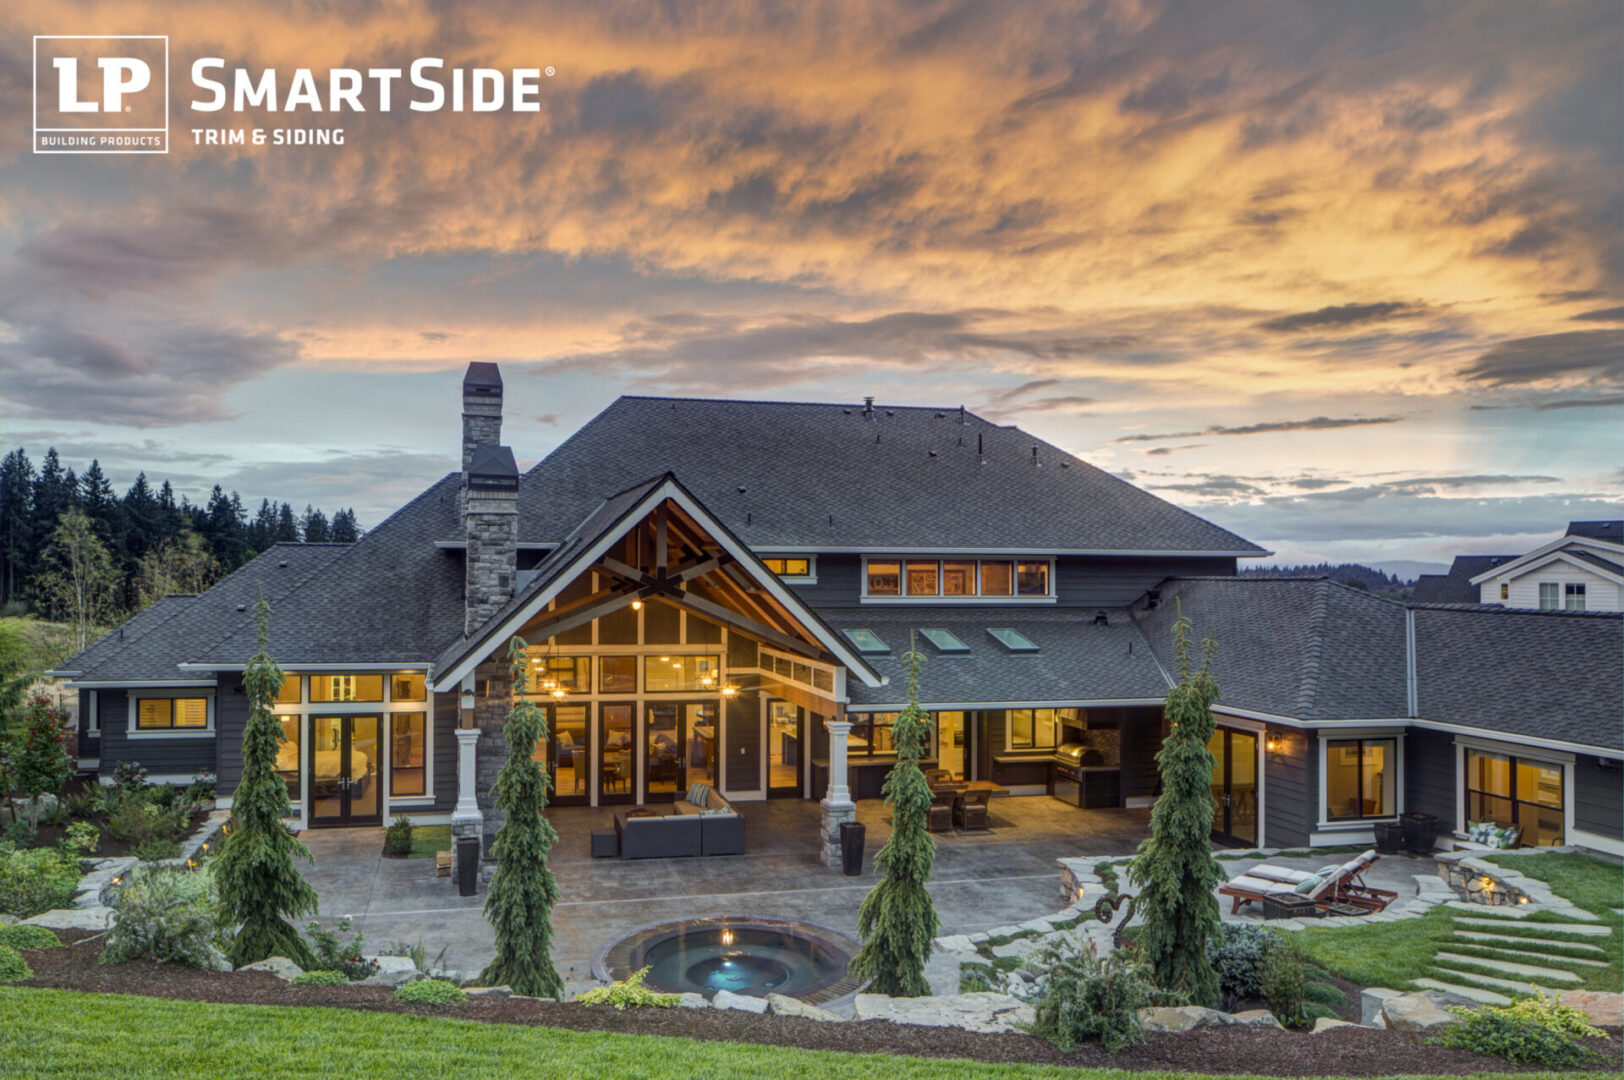 LP_Assets_HighRes High res - two-story large grey house at sunset - DOWNLOAD OR SHARE